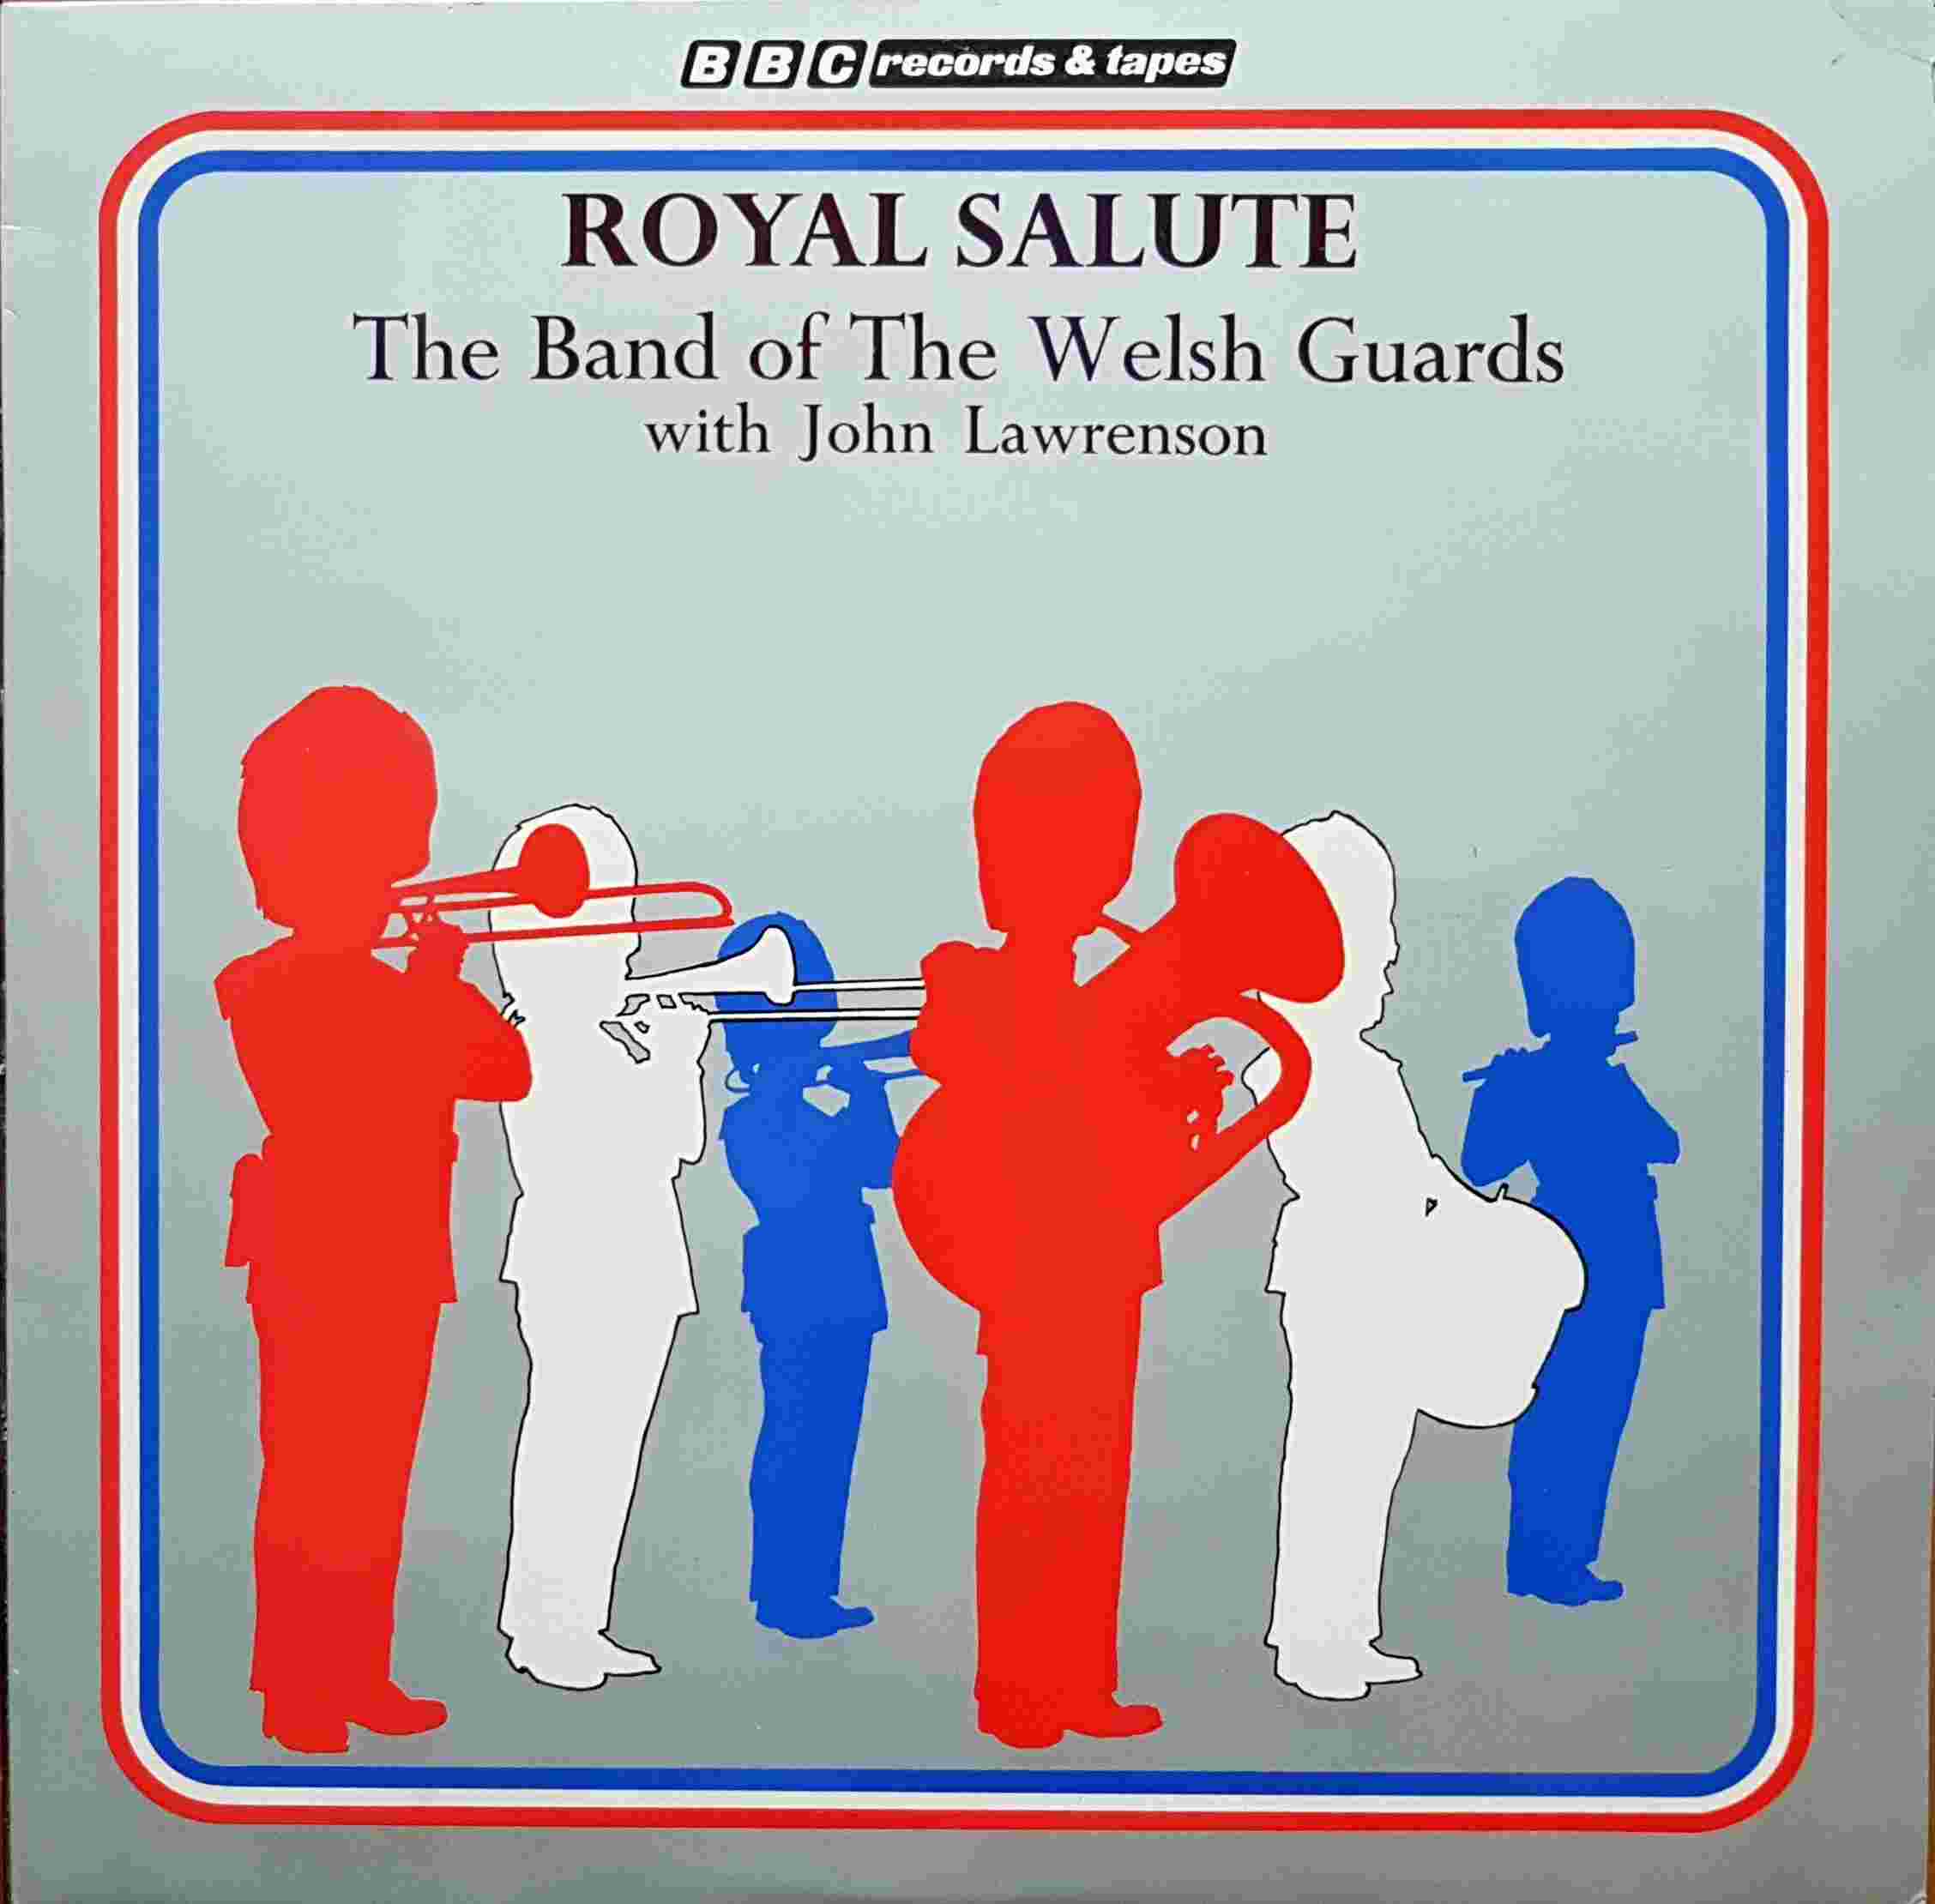 Picture of REB 274 The silver jubilee - Royal salute by artist The band of The Welsh Guard from the BBC albums - Records and Tapes library